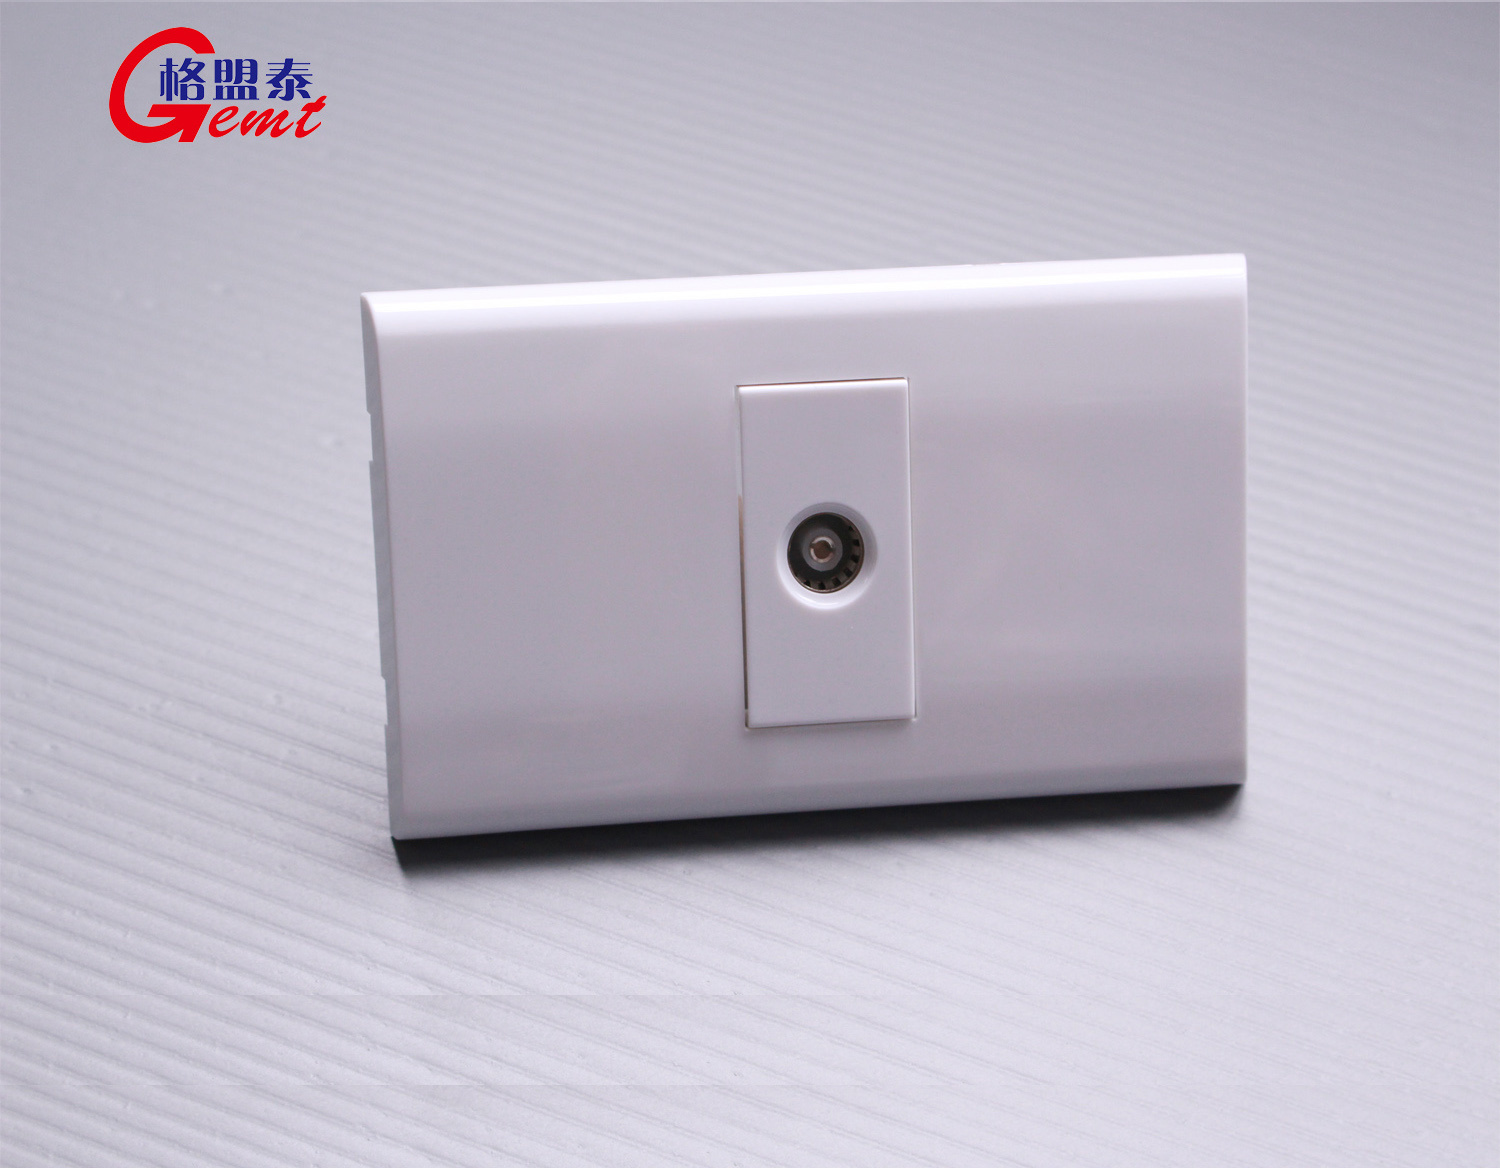 1 Coax Cable TV White Wall Plate